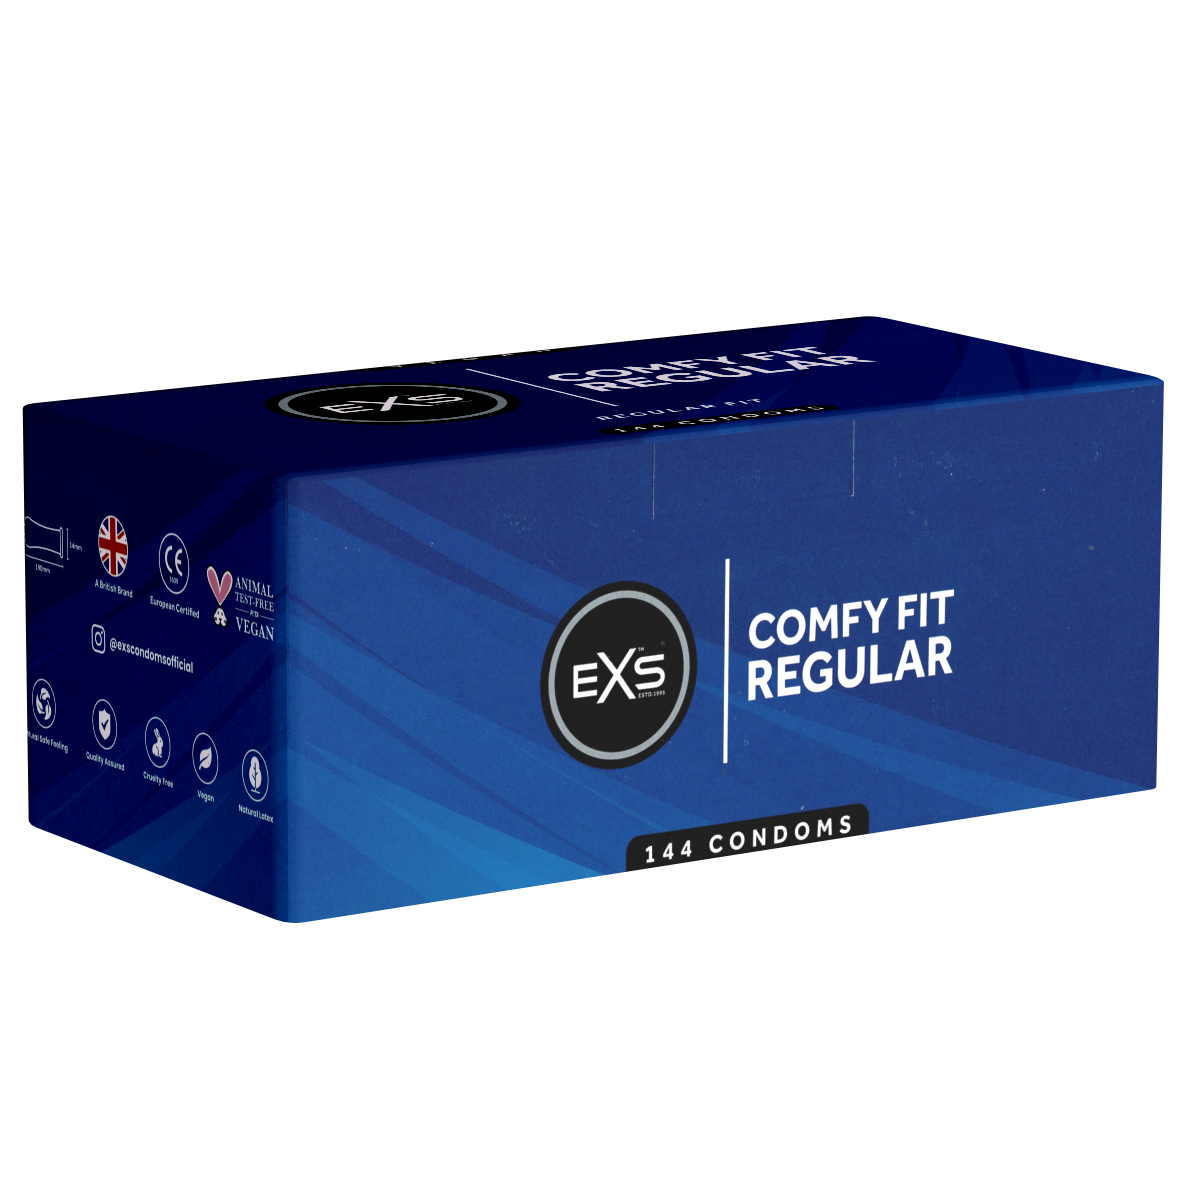 EXS «Regular» Comfy Fit, 144 comfortable condoms with 65mm head, clinic pack